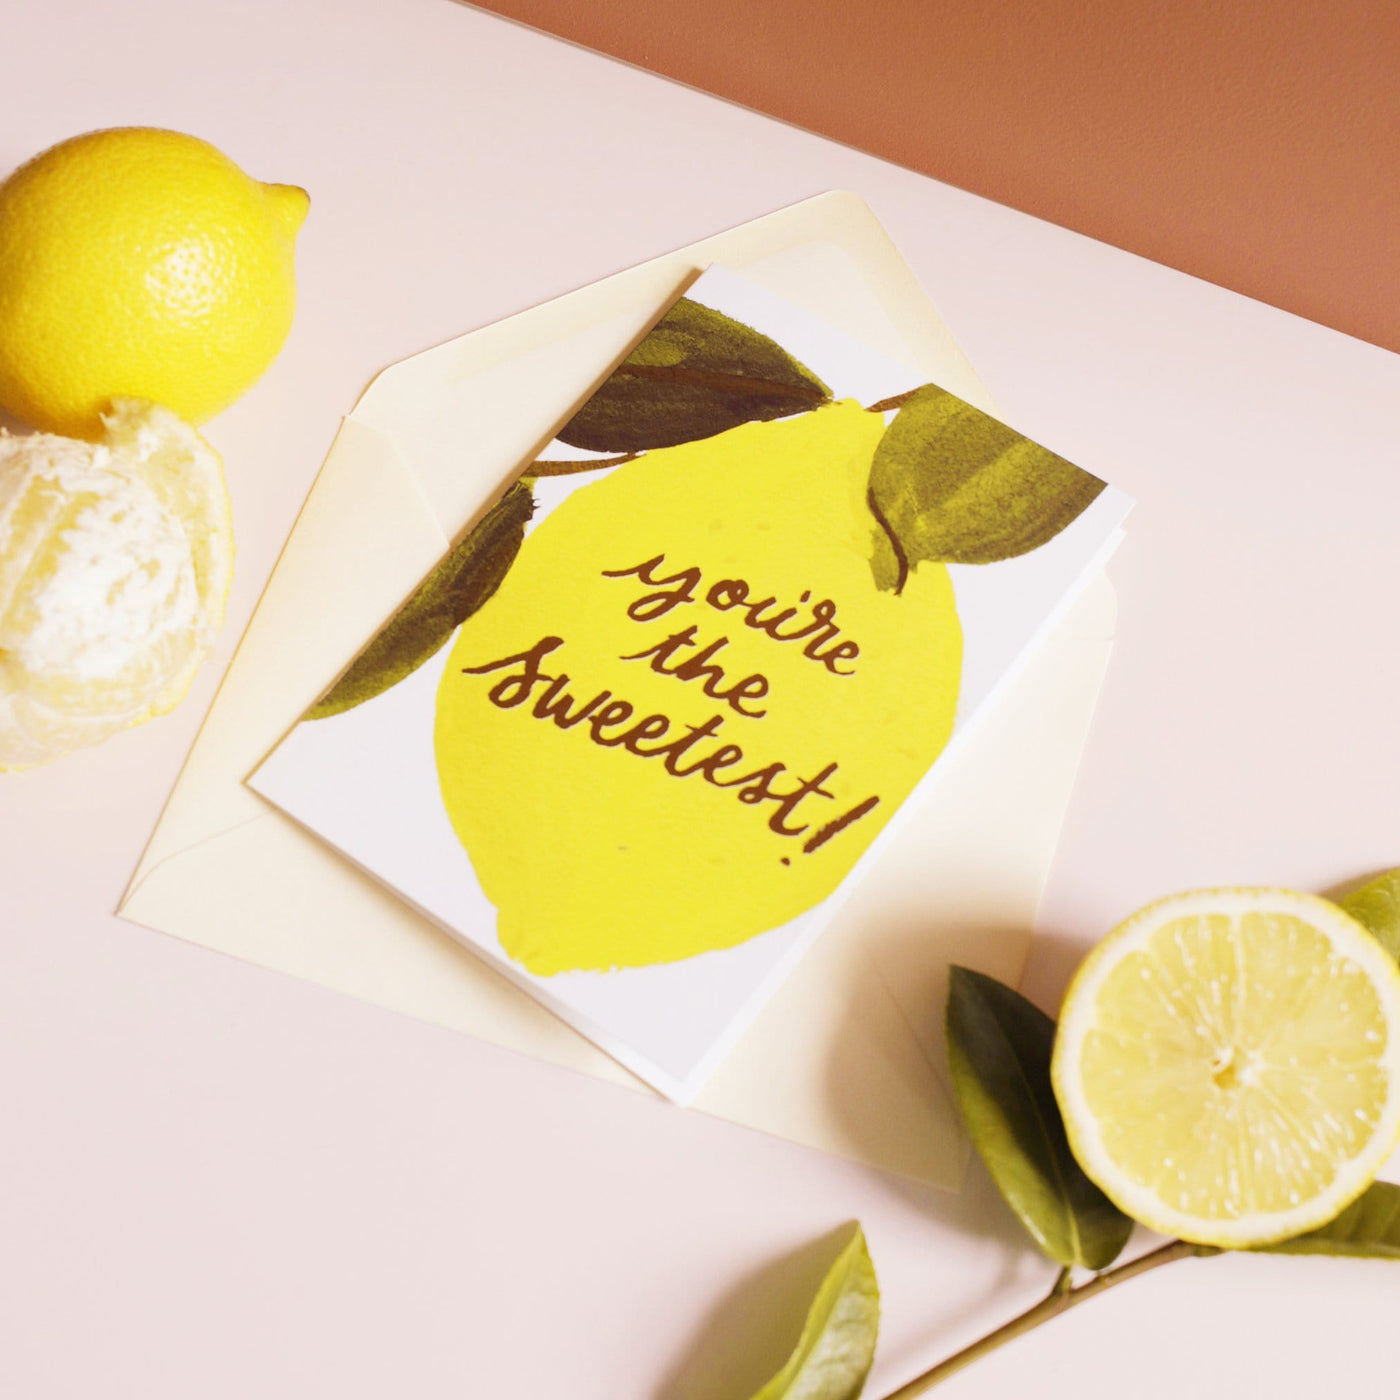 An Illustrated Lemon Card With The Words You're The Sweetest In Gold With A Pale Yellow Envelope - Annie Dornan Smith